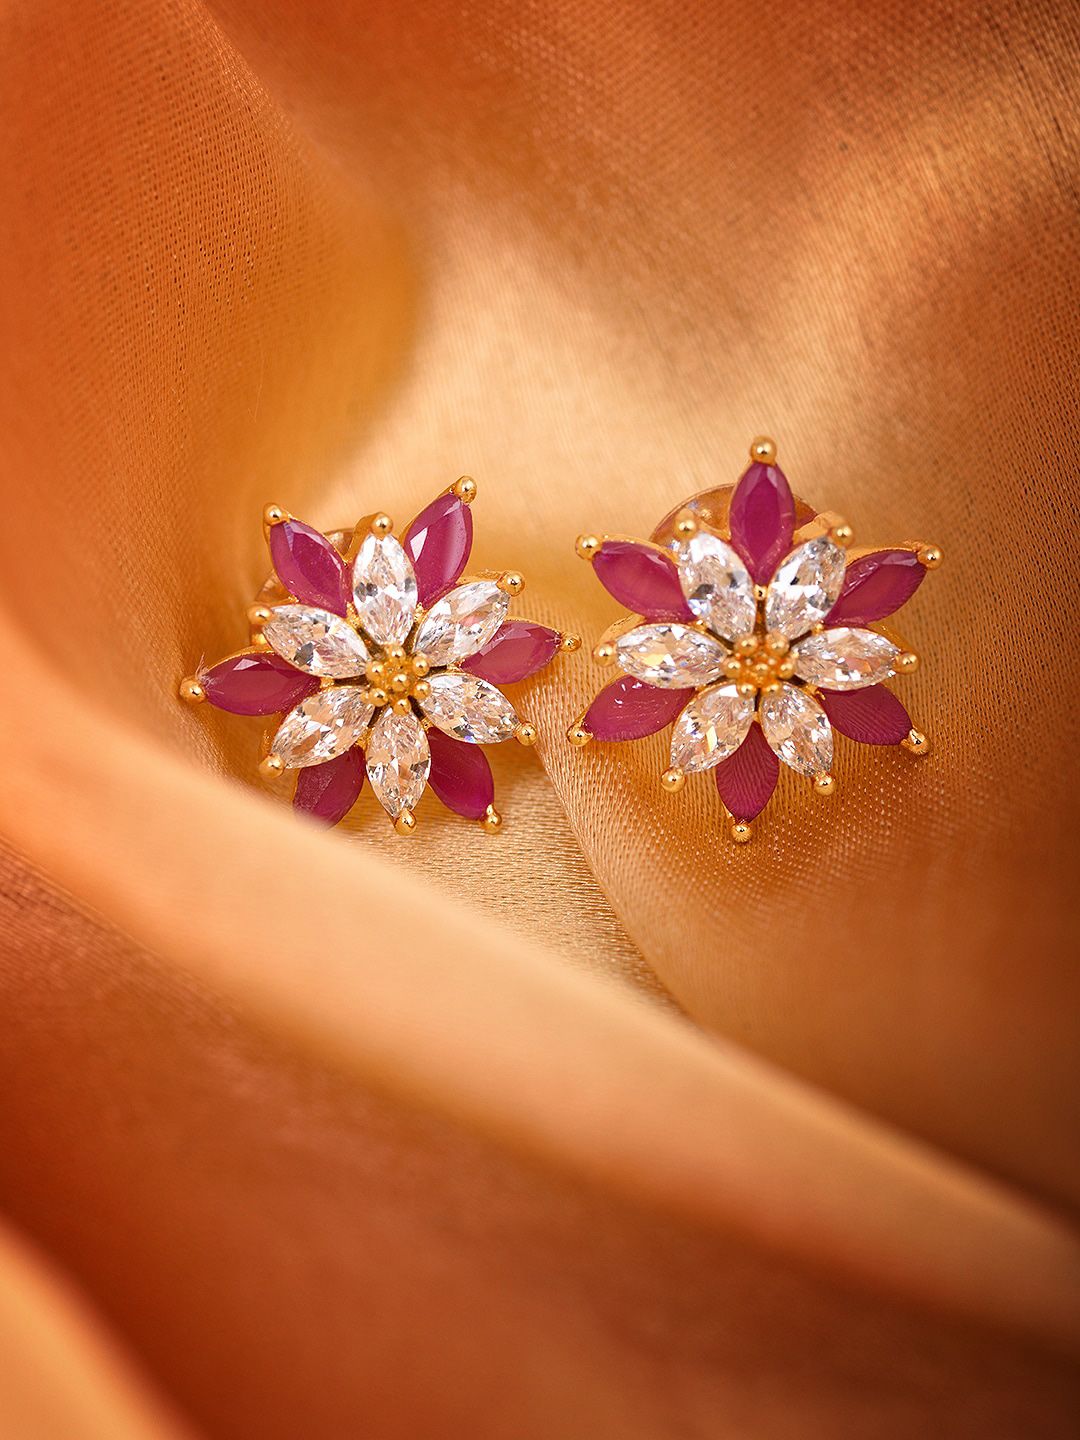 Saraf RS Jewellery Gold-Plated Magenta & White Floral Studs Earrings Price in India